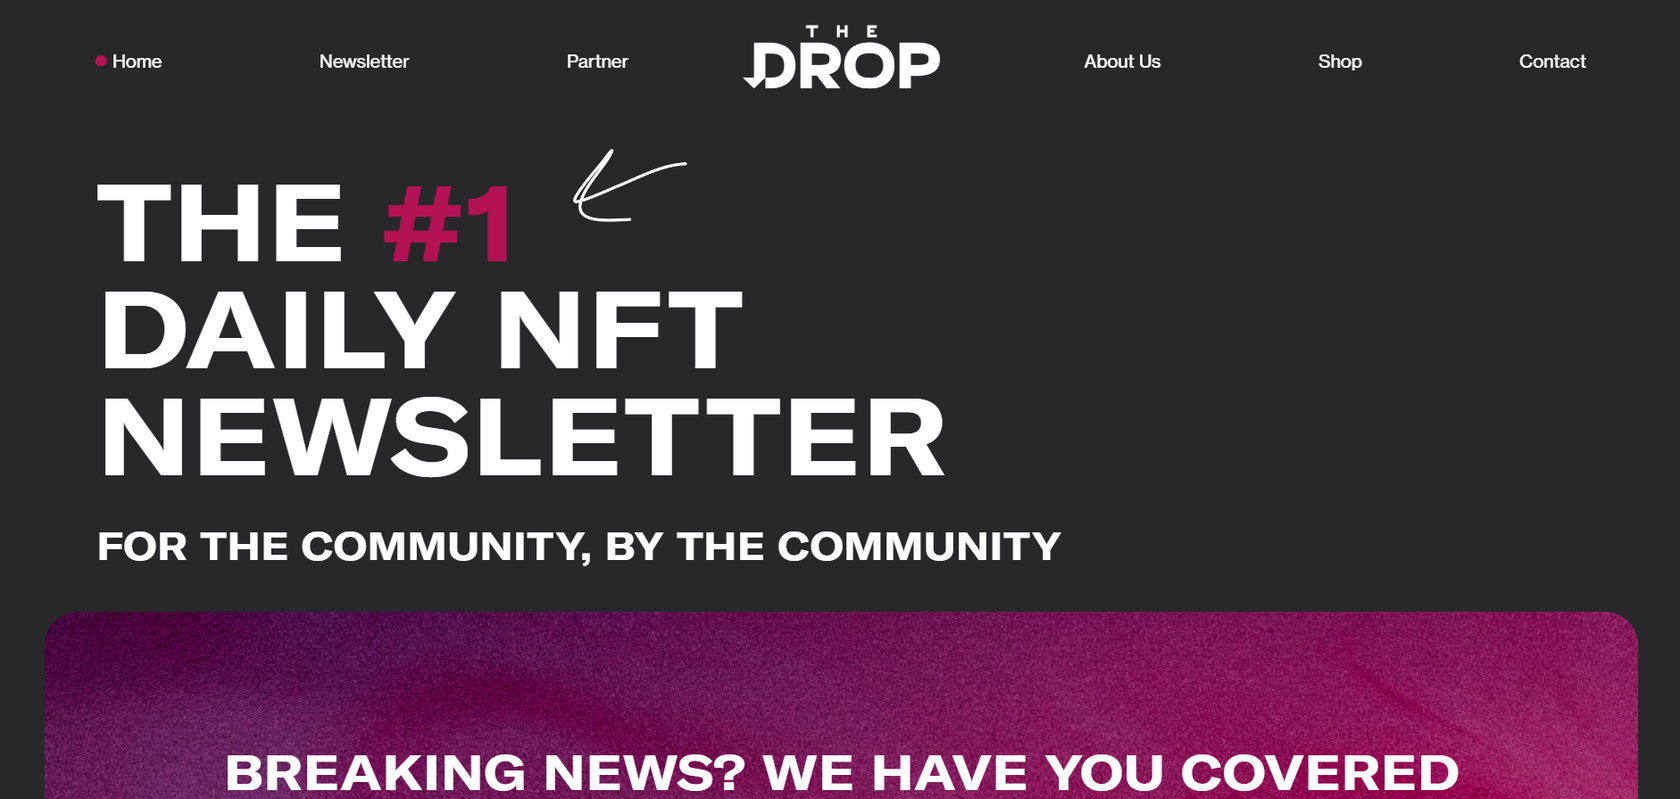 The Drop Newsletter